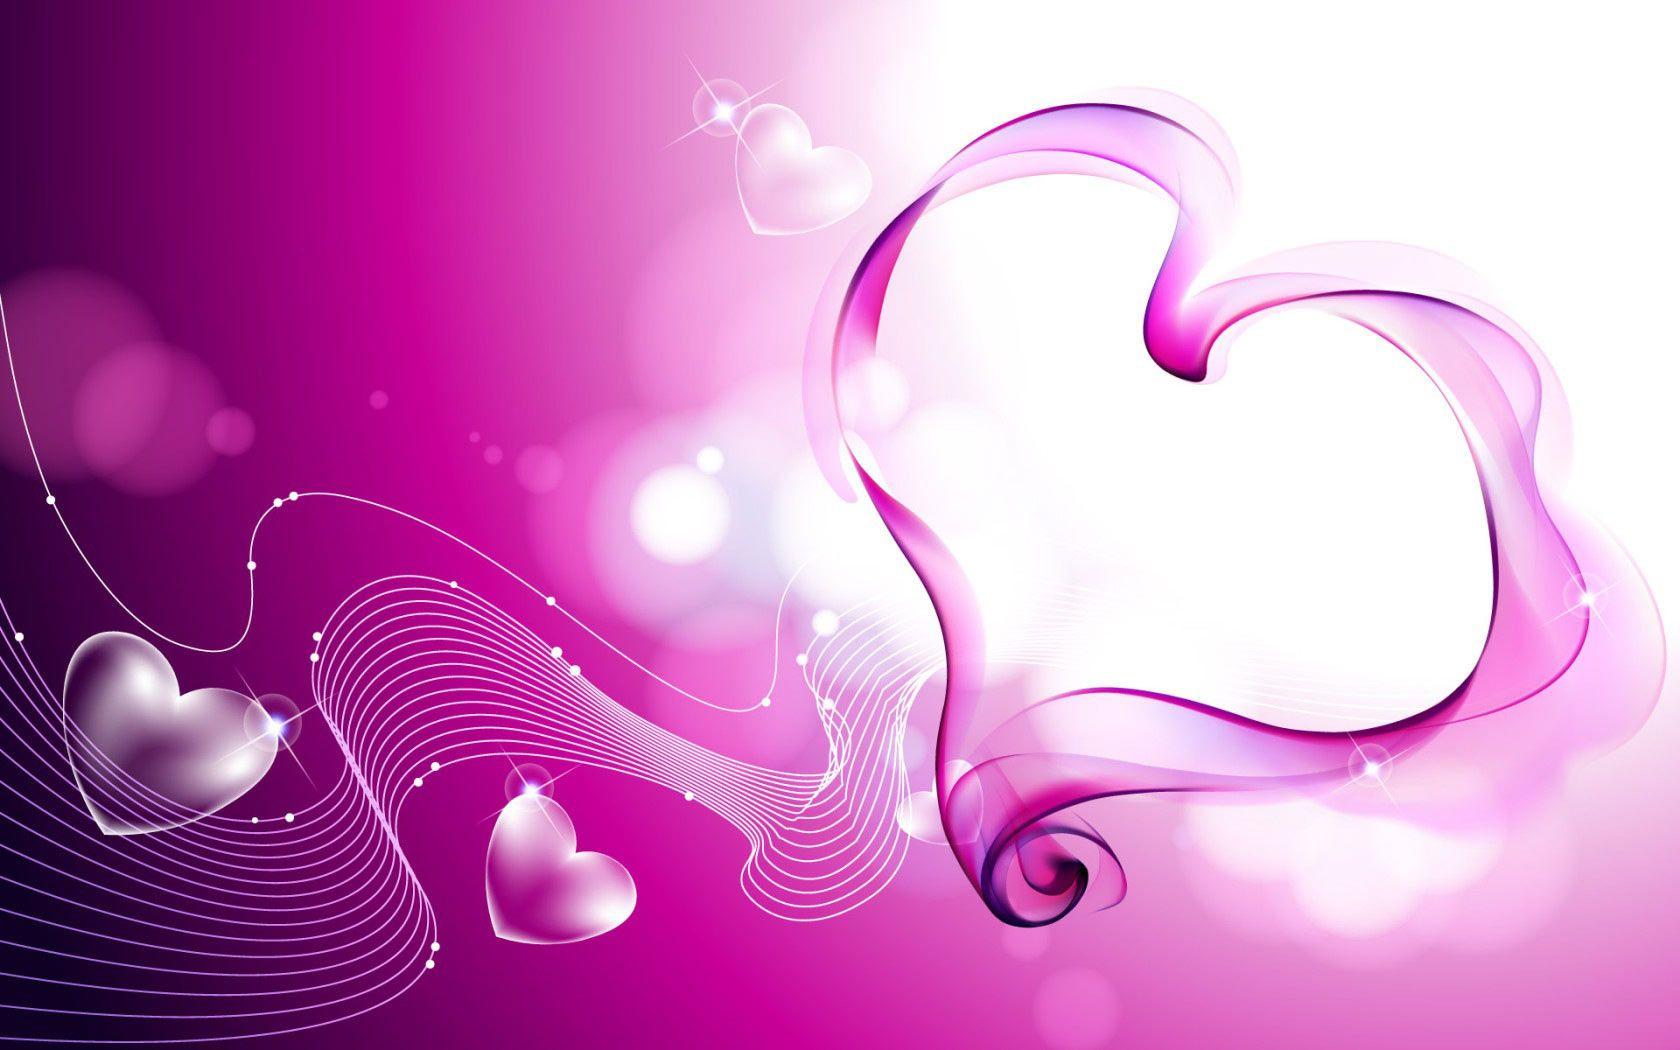 Animated Hearts In Background Wallpaper